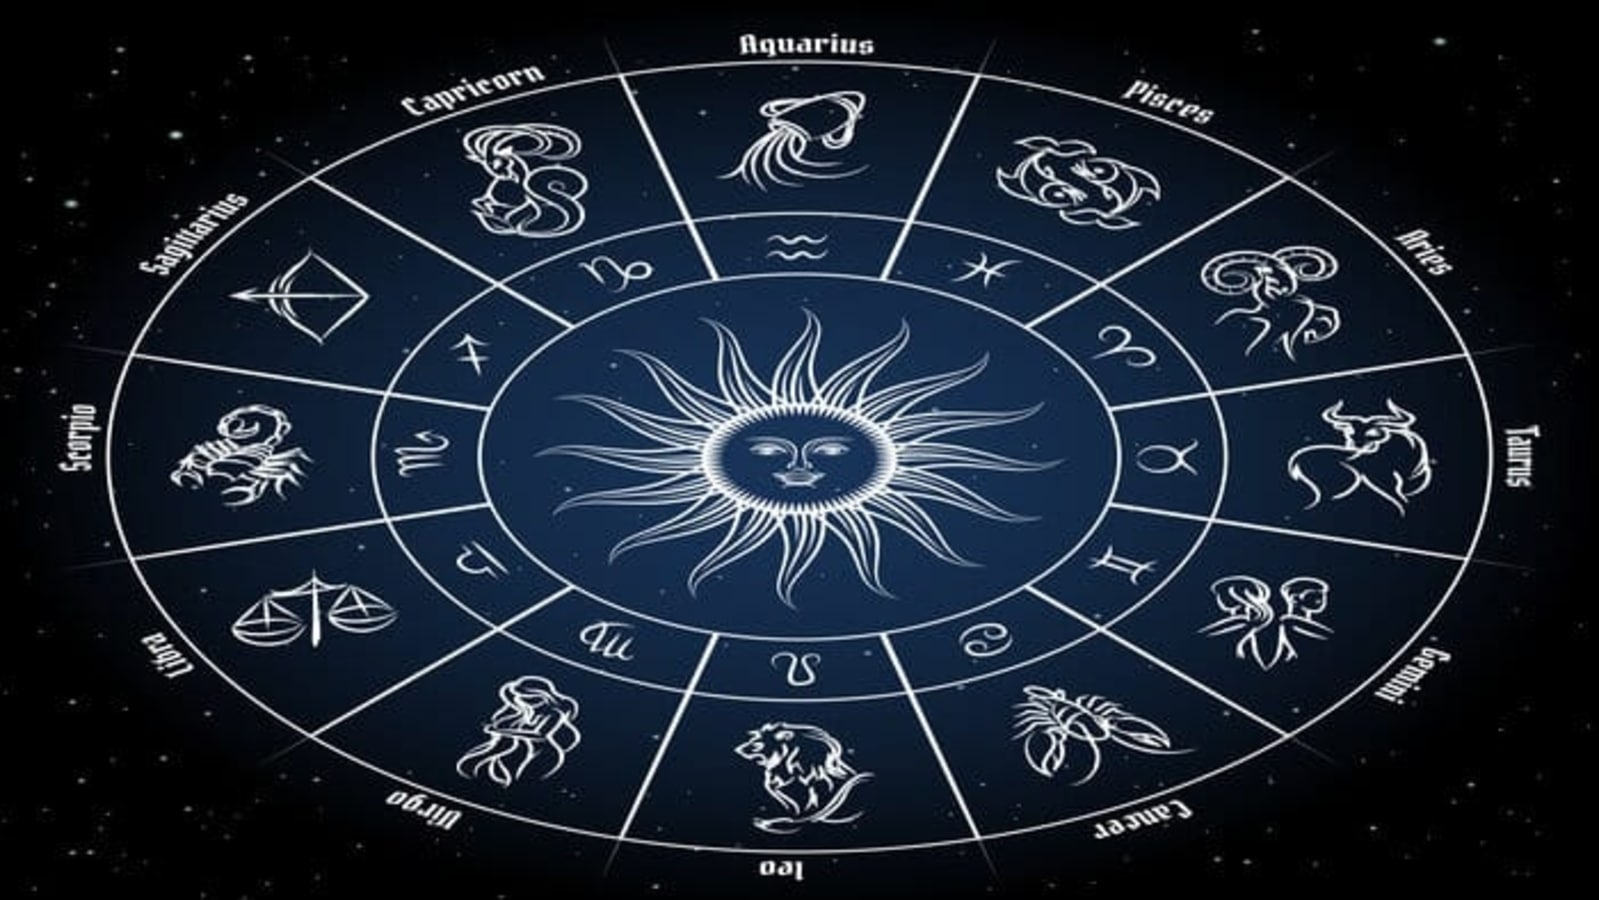 The Difference Between Sun, Moon, and Rising Sign Horoscopes 